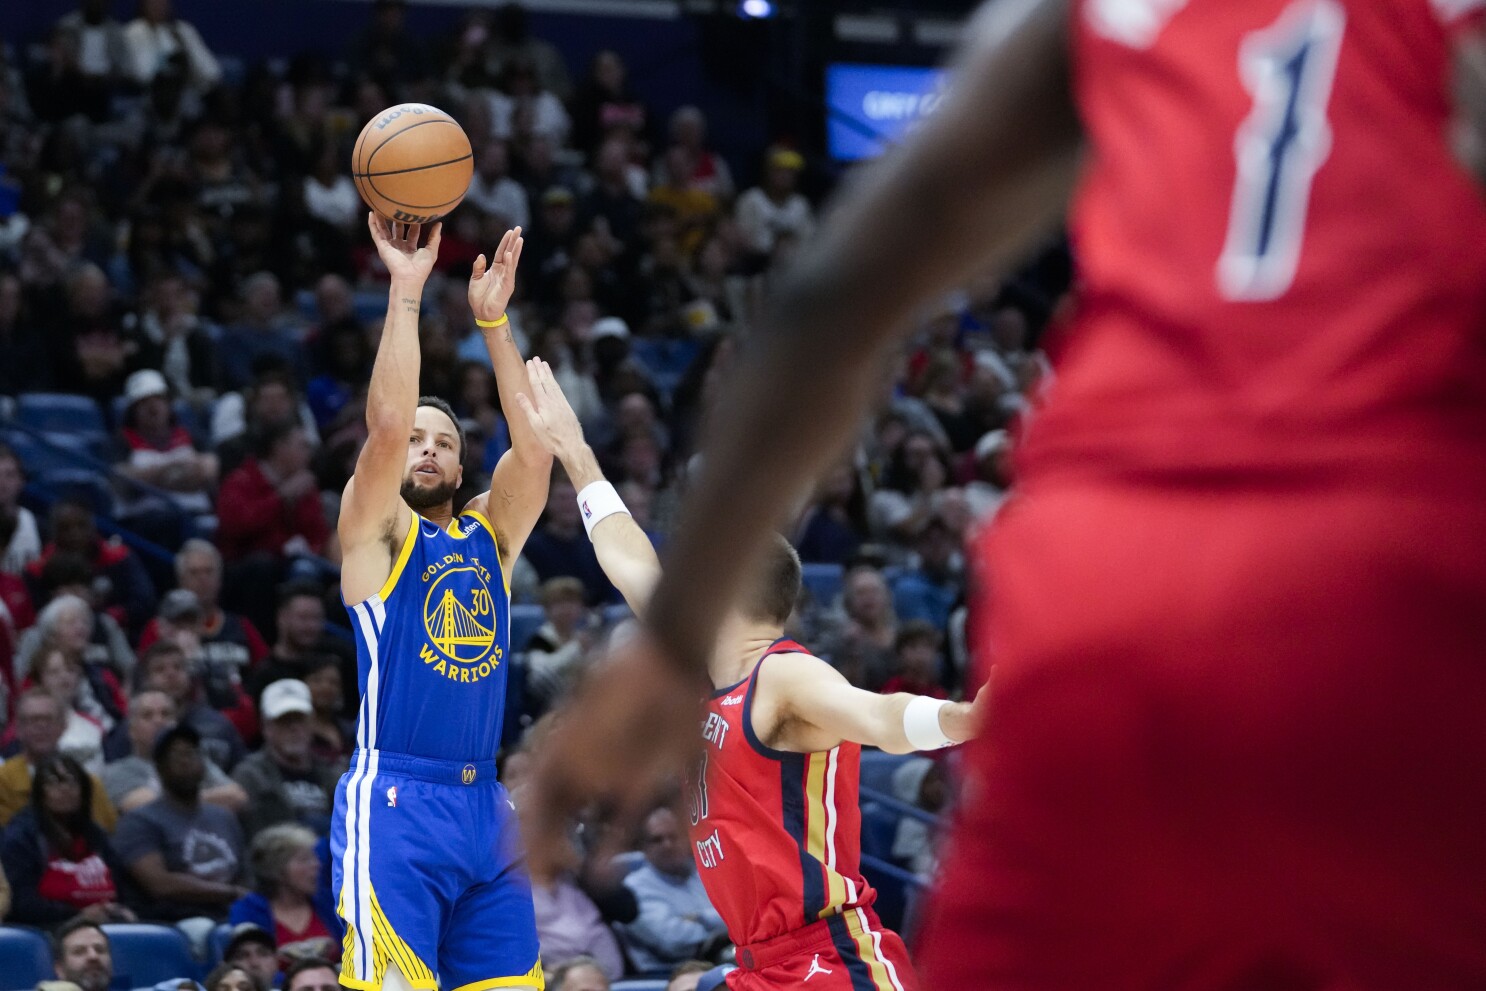 Curry hits 7 3-pointers, scores 42, as the Warriors roll past the